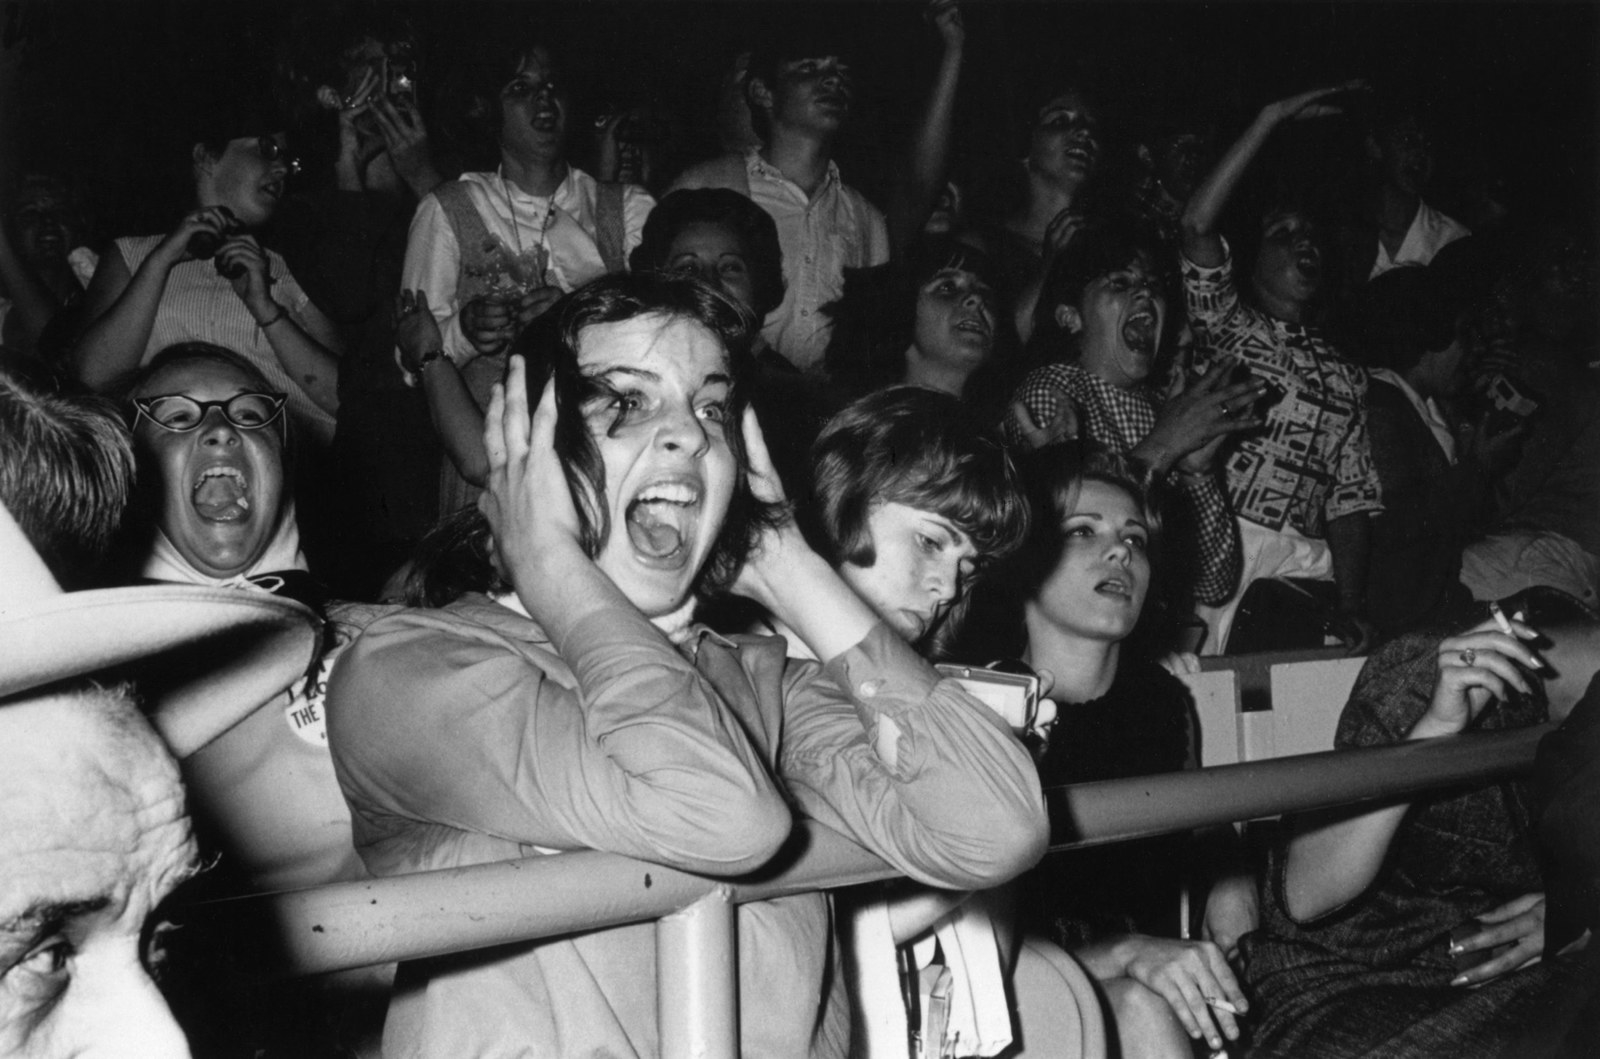 23 Photos That Prove Beatles Fans Were Doing The Absolute Most In The '60s